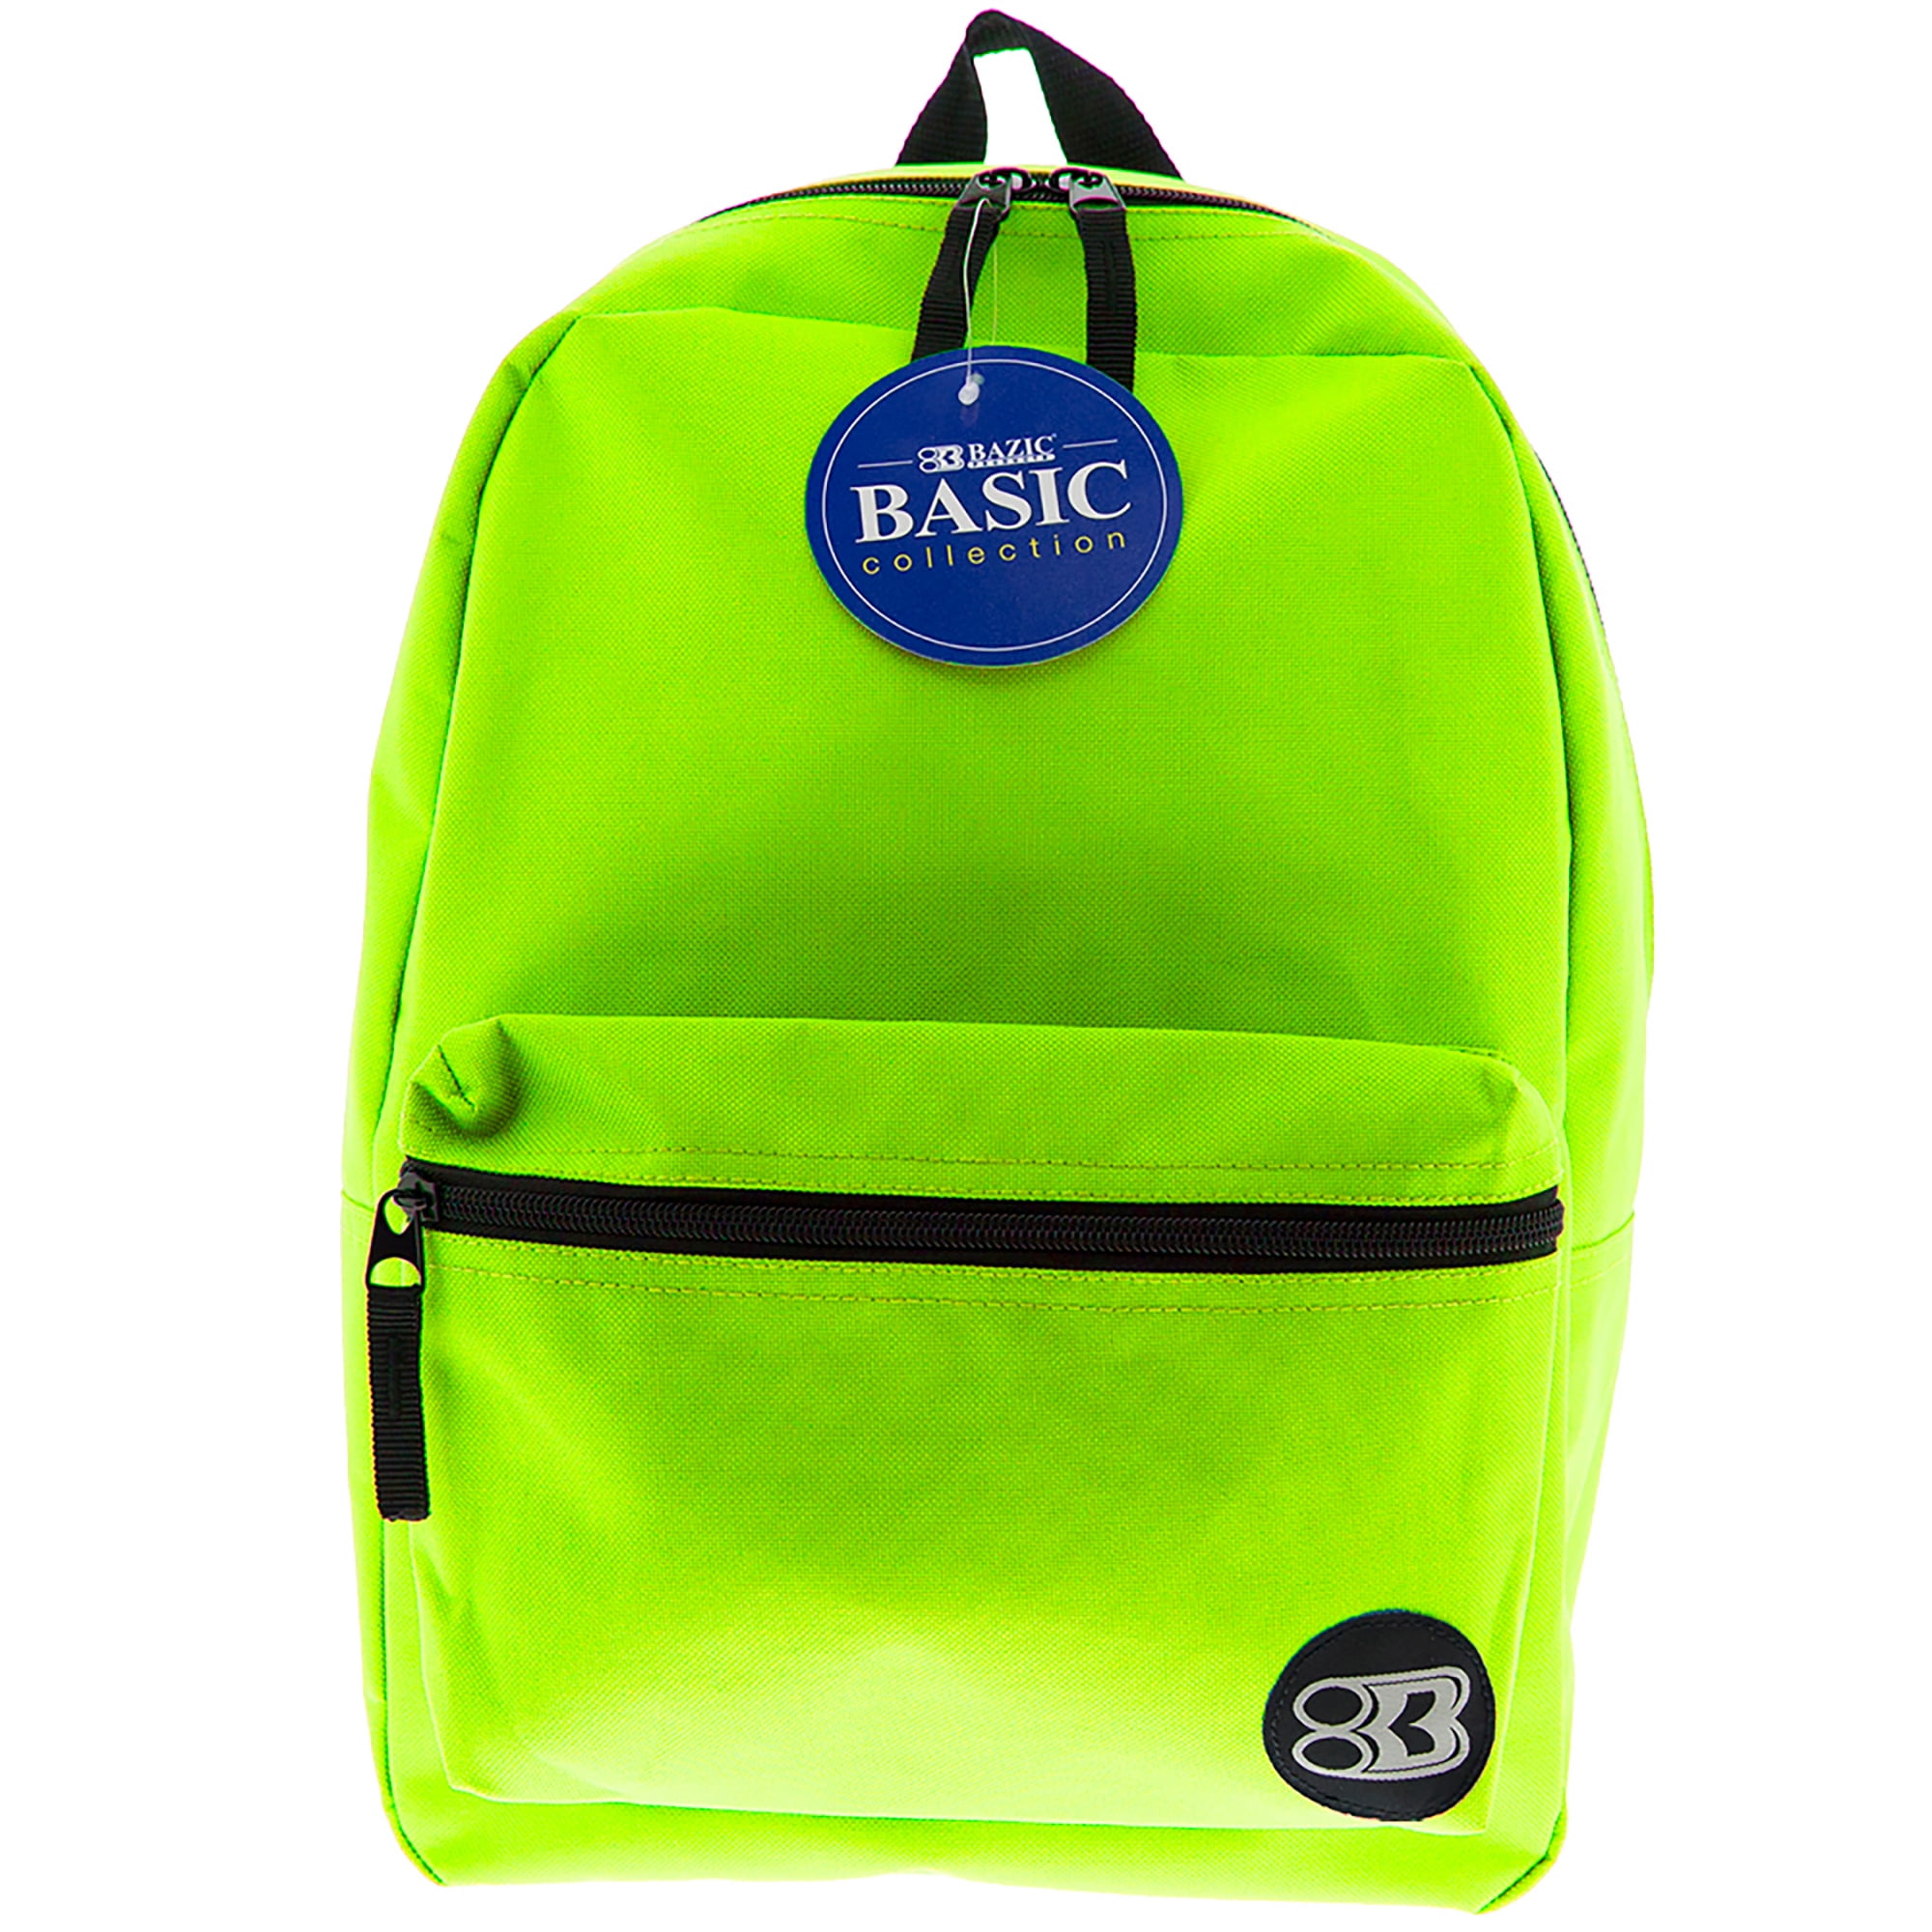 Details about   Waterproof School Backpack For Kids Girls Boys Teenagers Fashion Students Colleg 